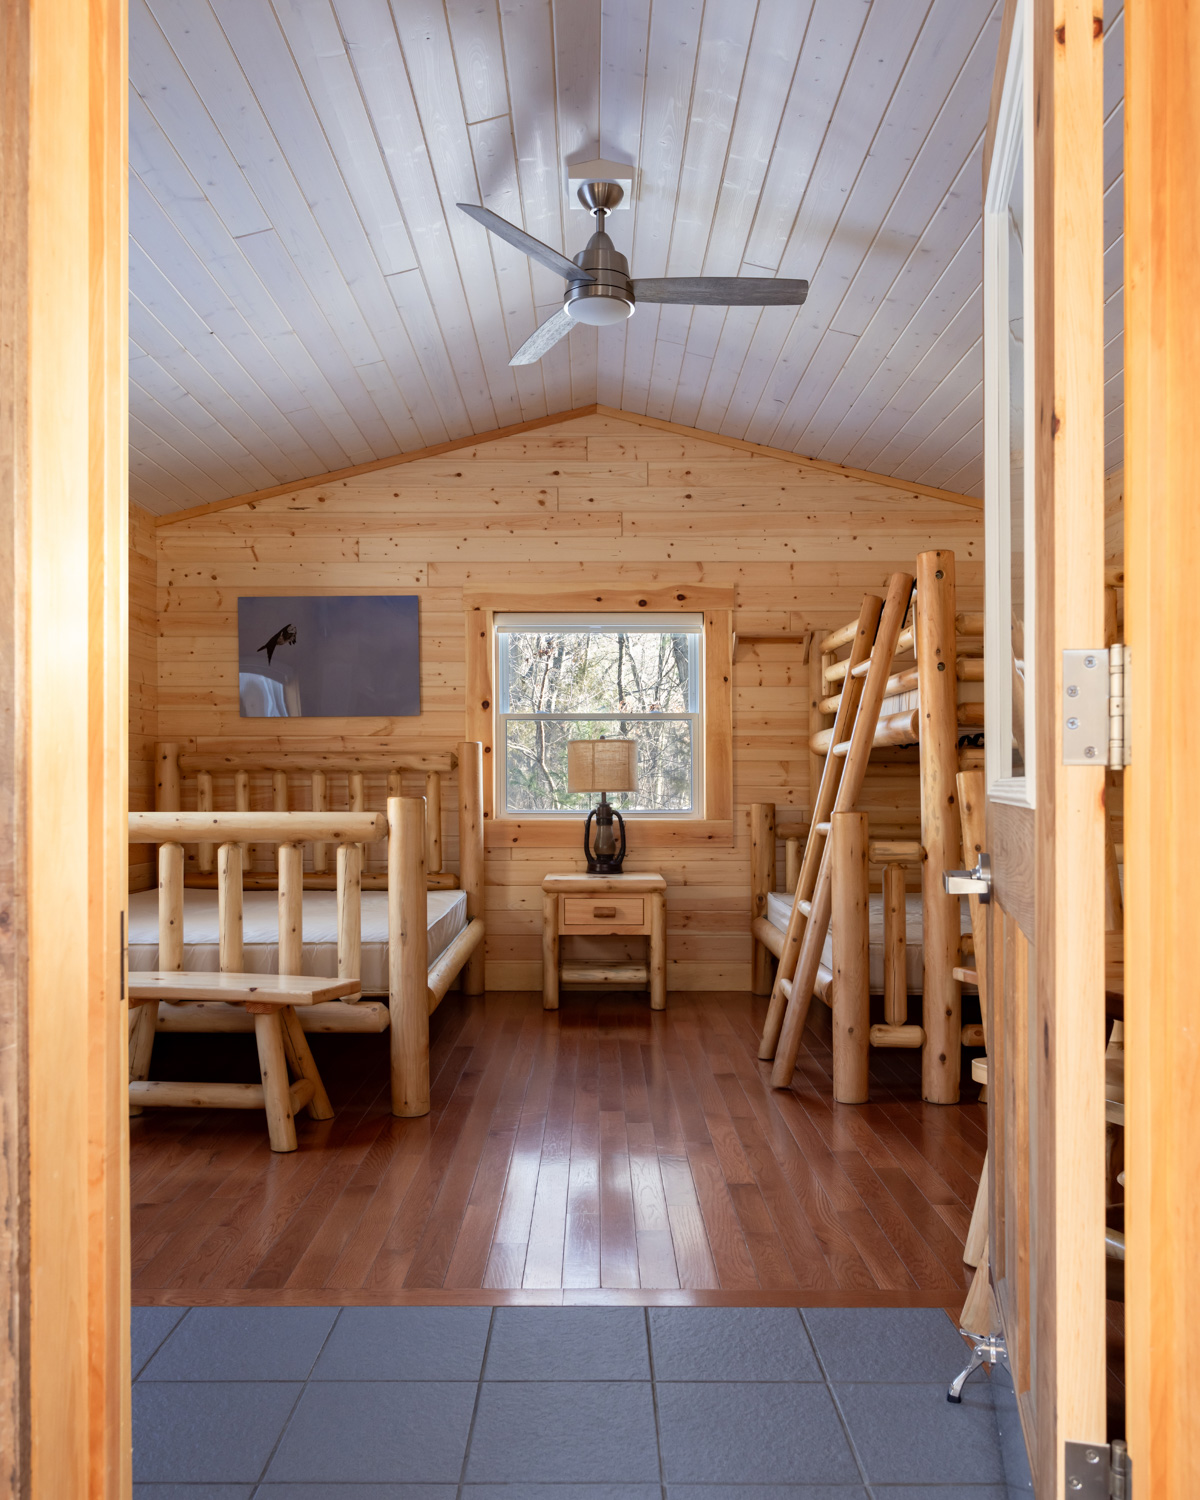 Inside the Pinery Provincial Park cabins.